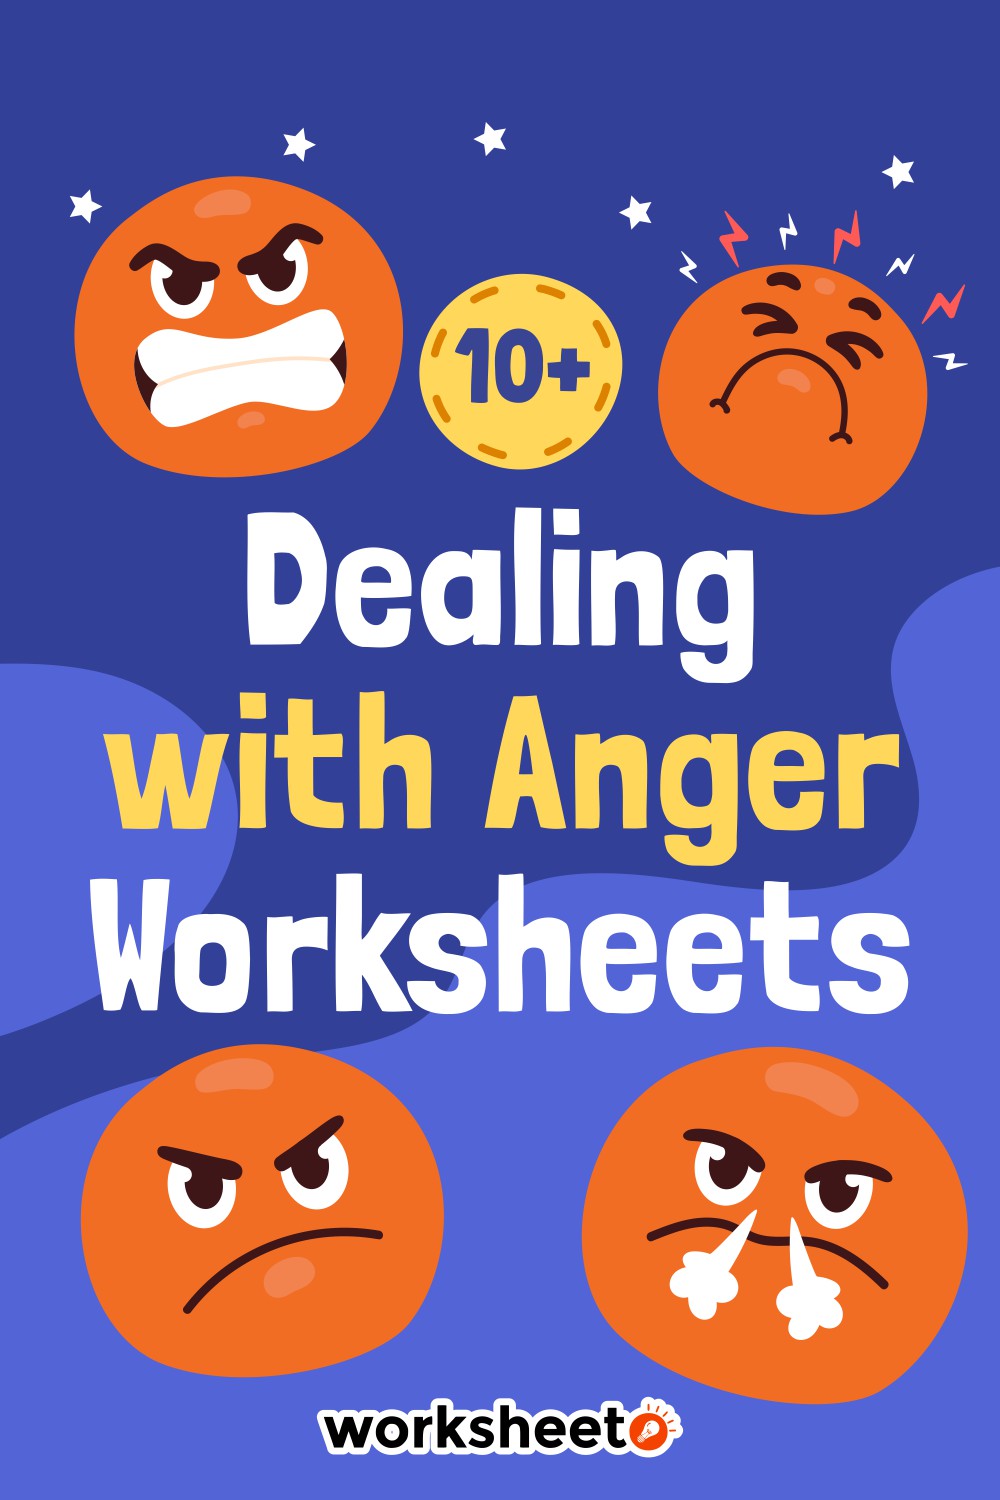 Dealing with Anger Worksheets